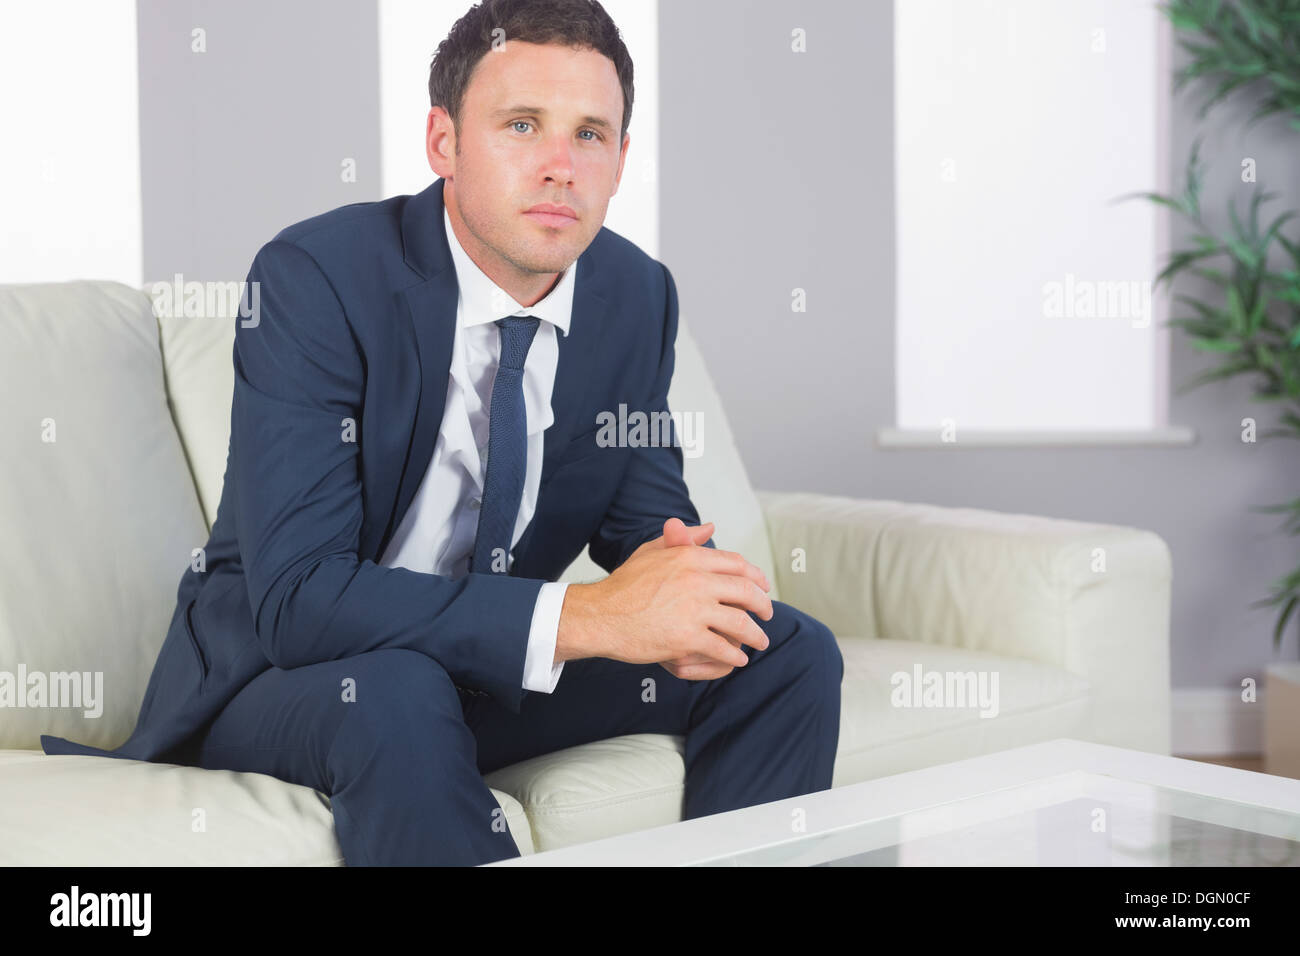 Calm handsome businessman relaxing on couch Banque D'Images